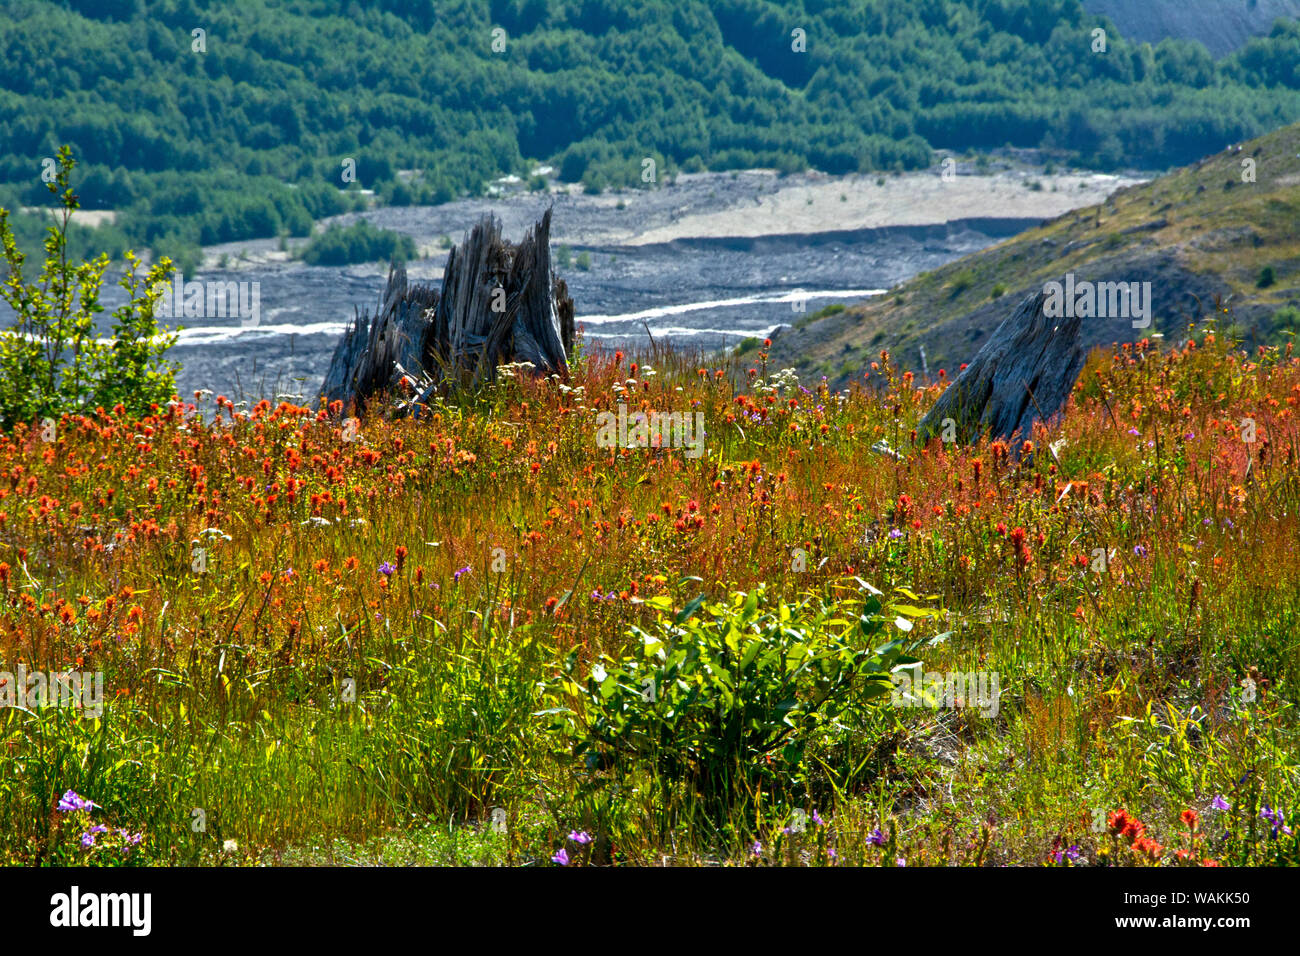 Regrowth from devastation, Mount St. Helens National Volcanic Monument, Washington State, USA Stock Photo